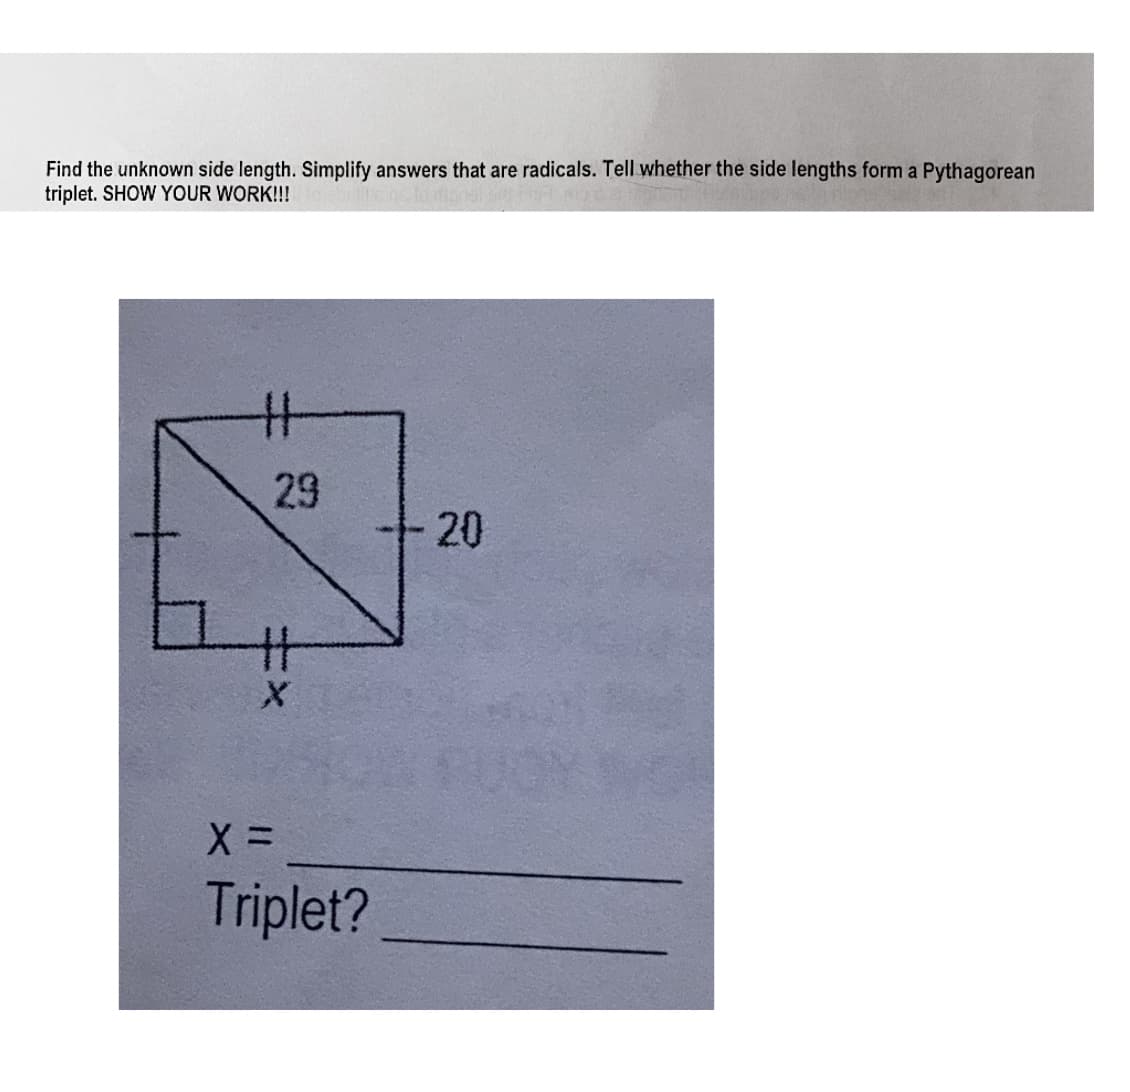 Find the unknown side length. Simplify answers that are radicals. Tell whether the side lengths form a Pythagorean
triplet. SHOW YOUR WORK!!!
29
20
Triplet?
